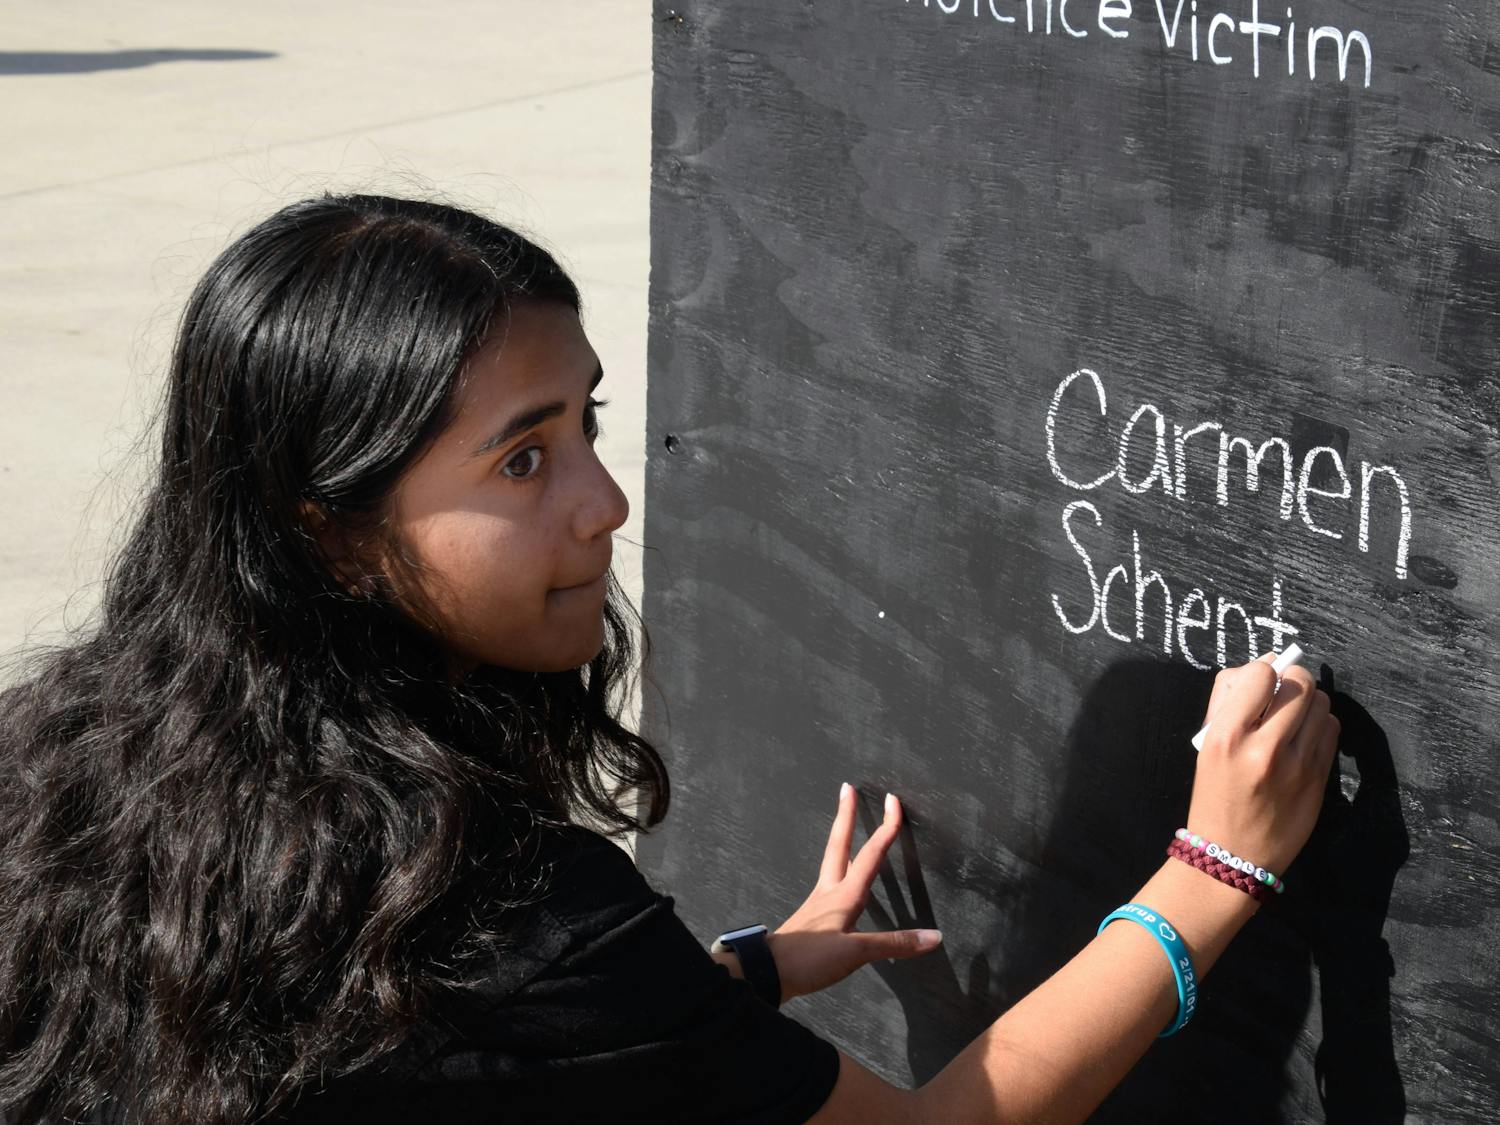 MSD alum Anisha Saripalli, an 18-year-old biomedical engineering sophomore and the March for Our Lives Gainesville treasurer, writes the name of her friend down on the gun violence victim board. Carmen Schentrup was a Marjory Stoneman Douglas student who died in the shooting just days after she was accepted into UF.